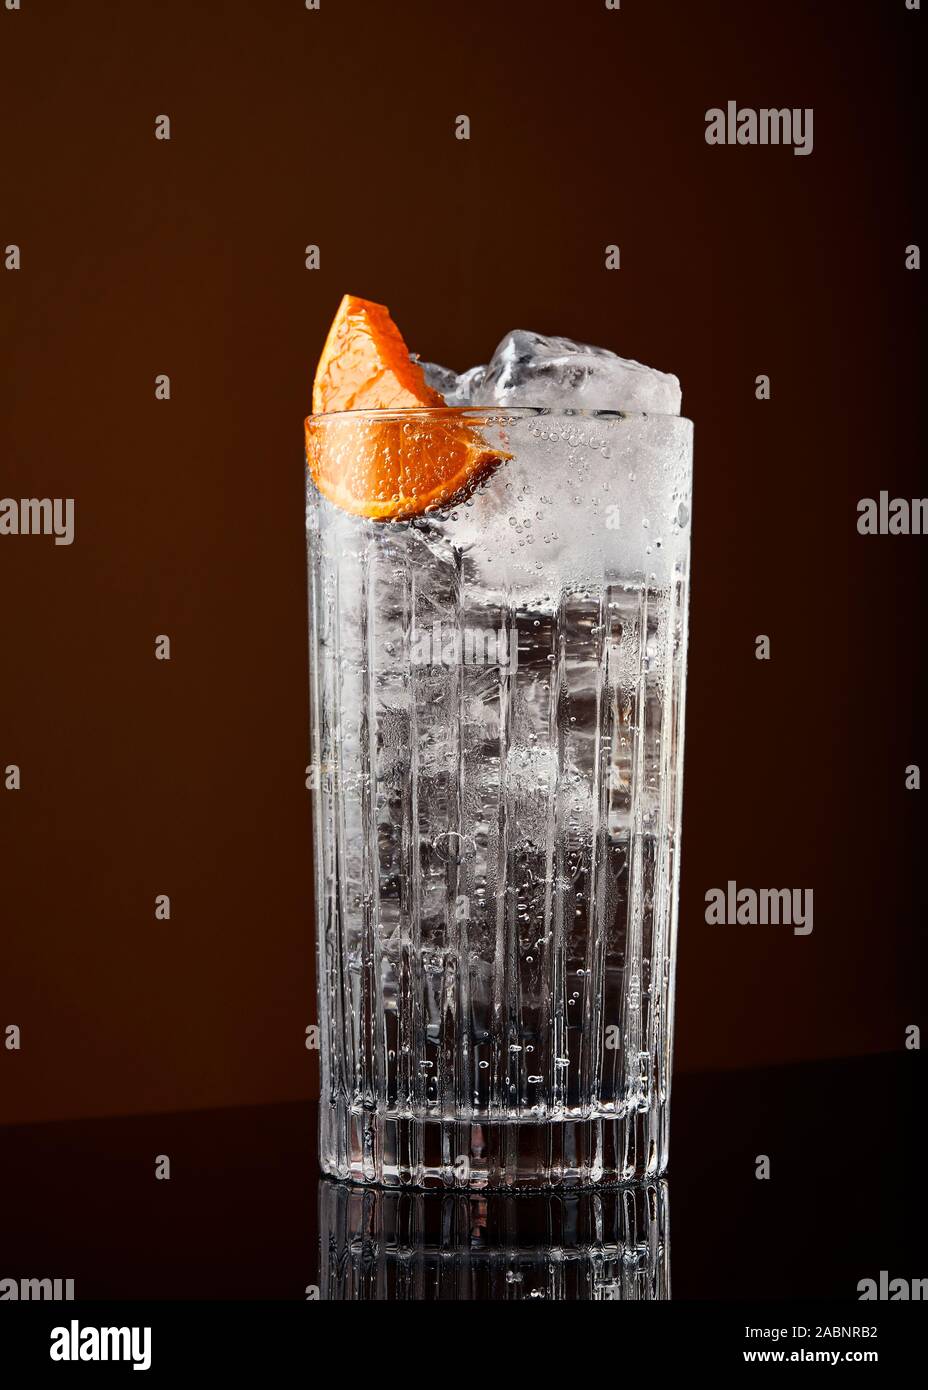 high ball gin and tonic with orange garnish against an orange background Stock Photo